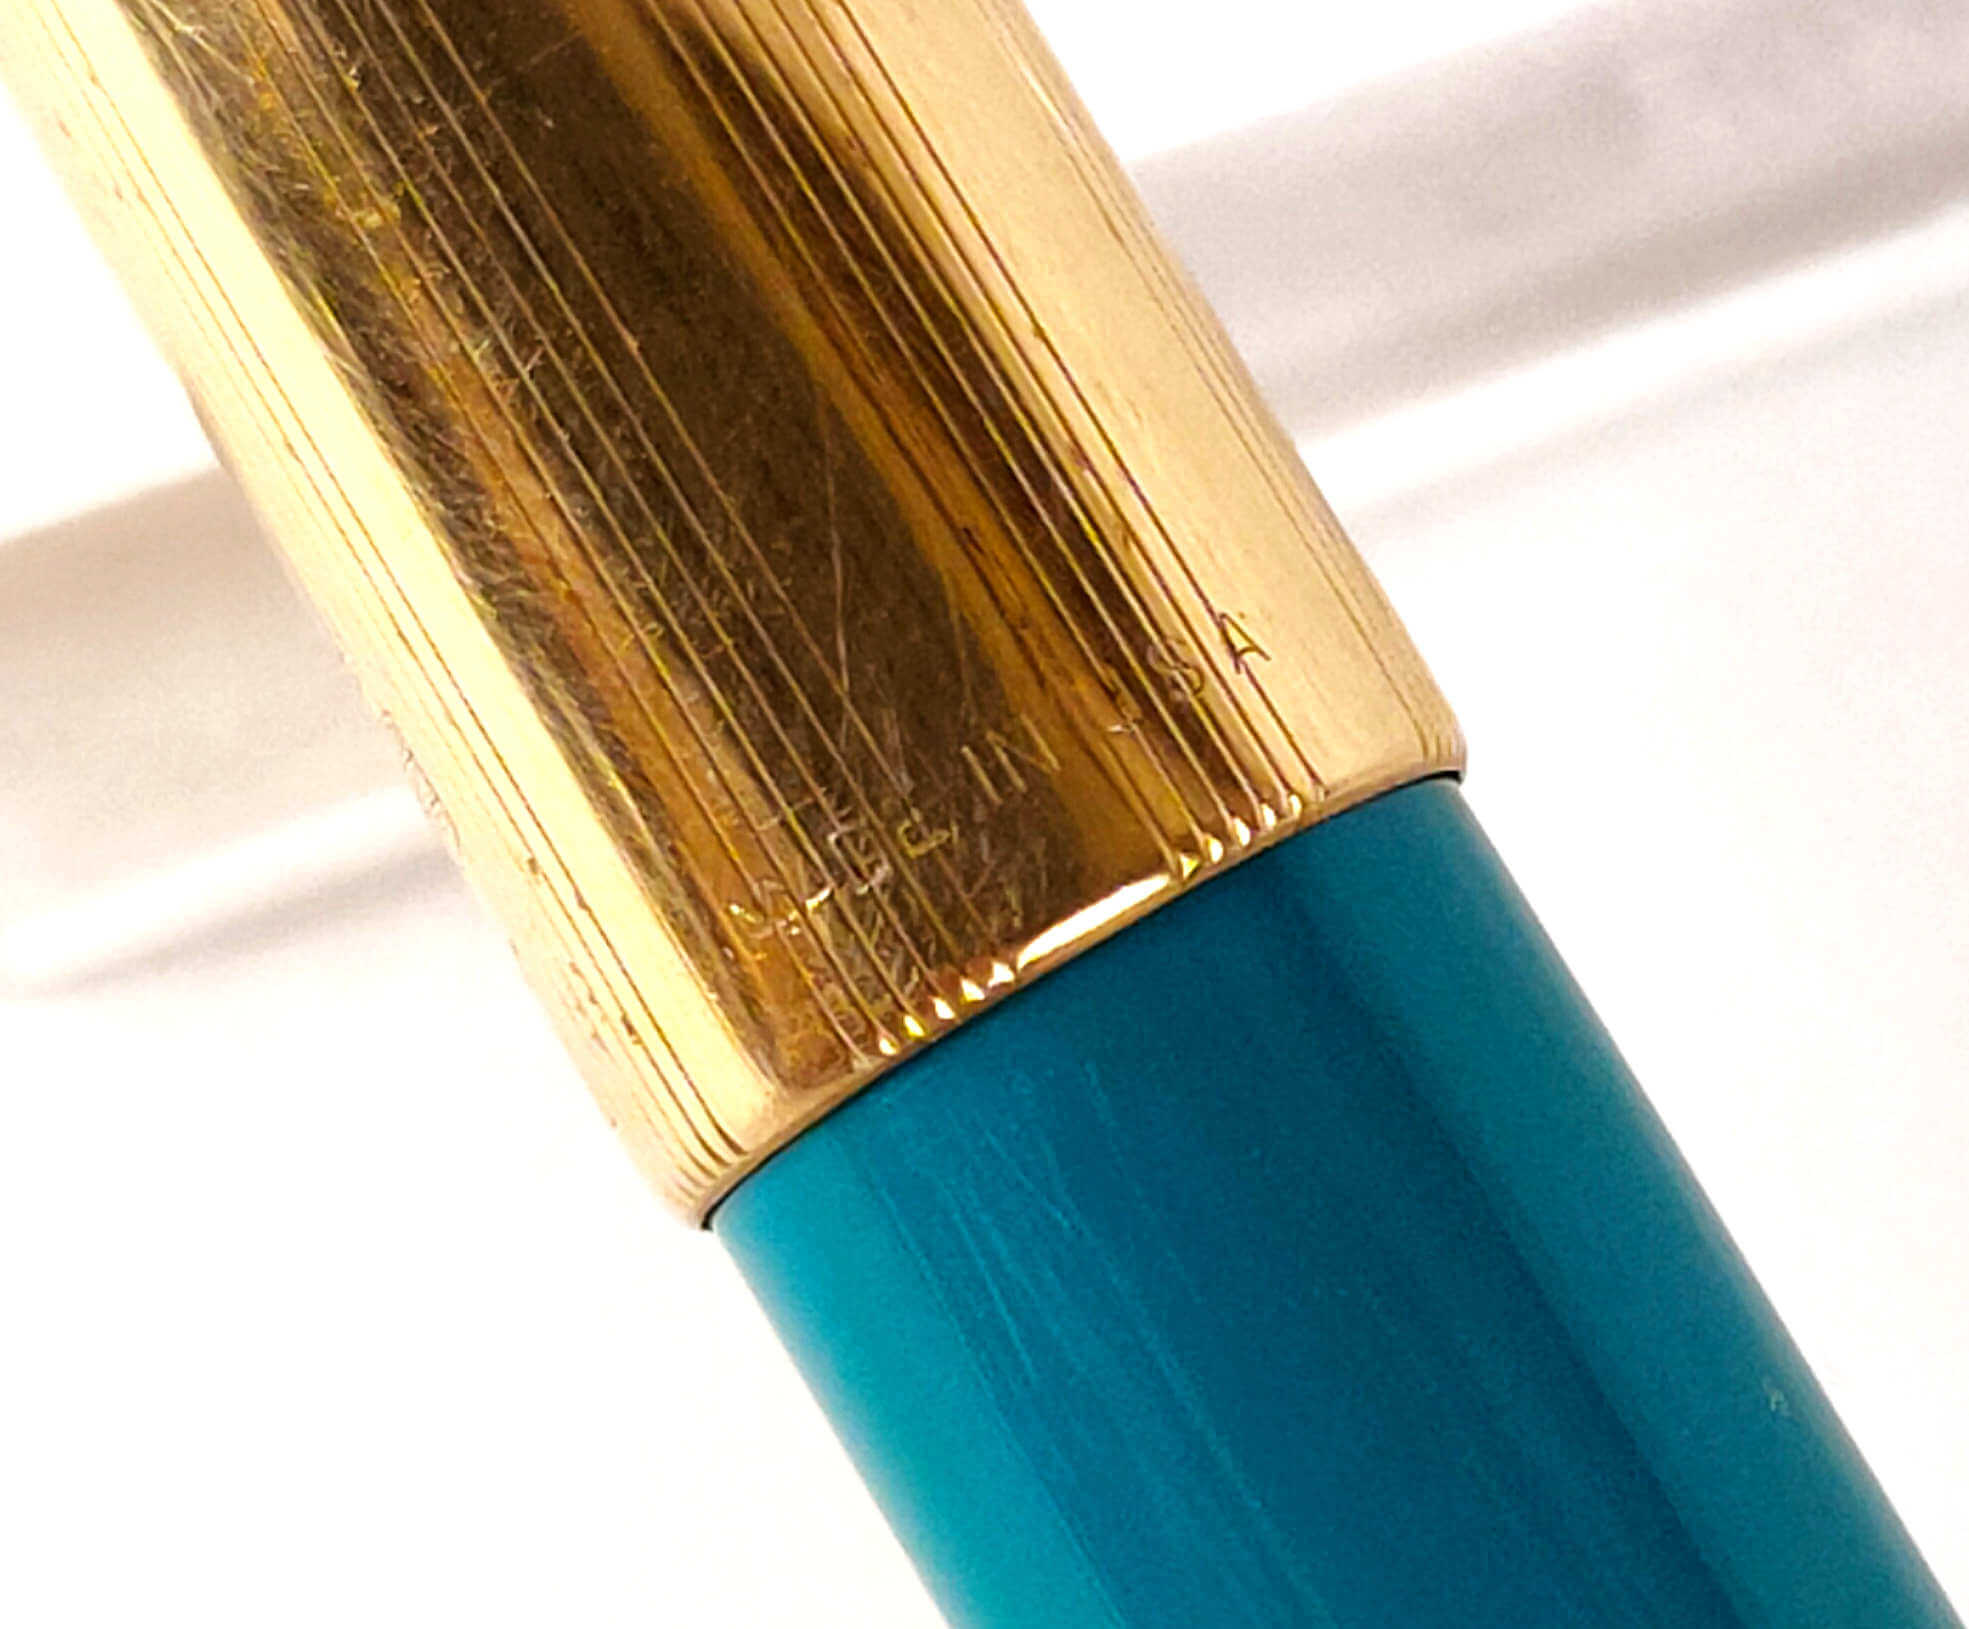 Parker 61 Fountain Pen Barrel in Teal Blue New Old Stock. 